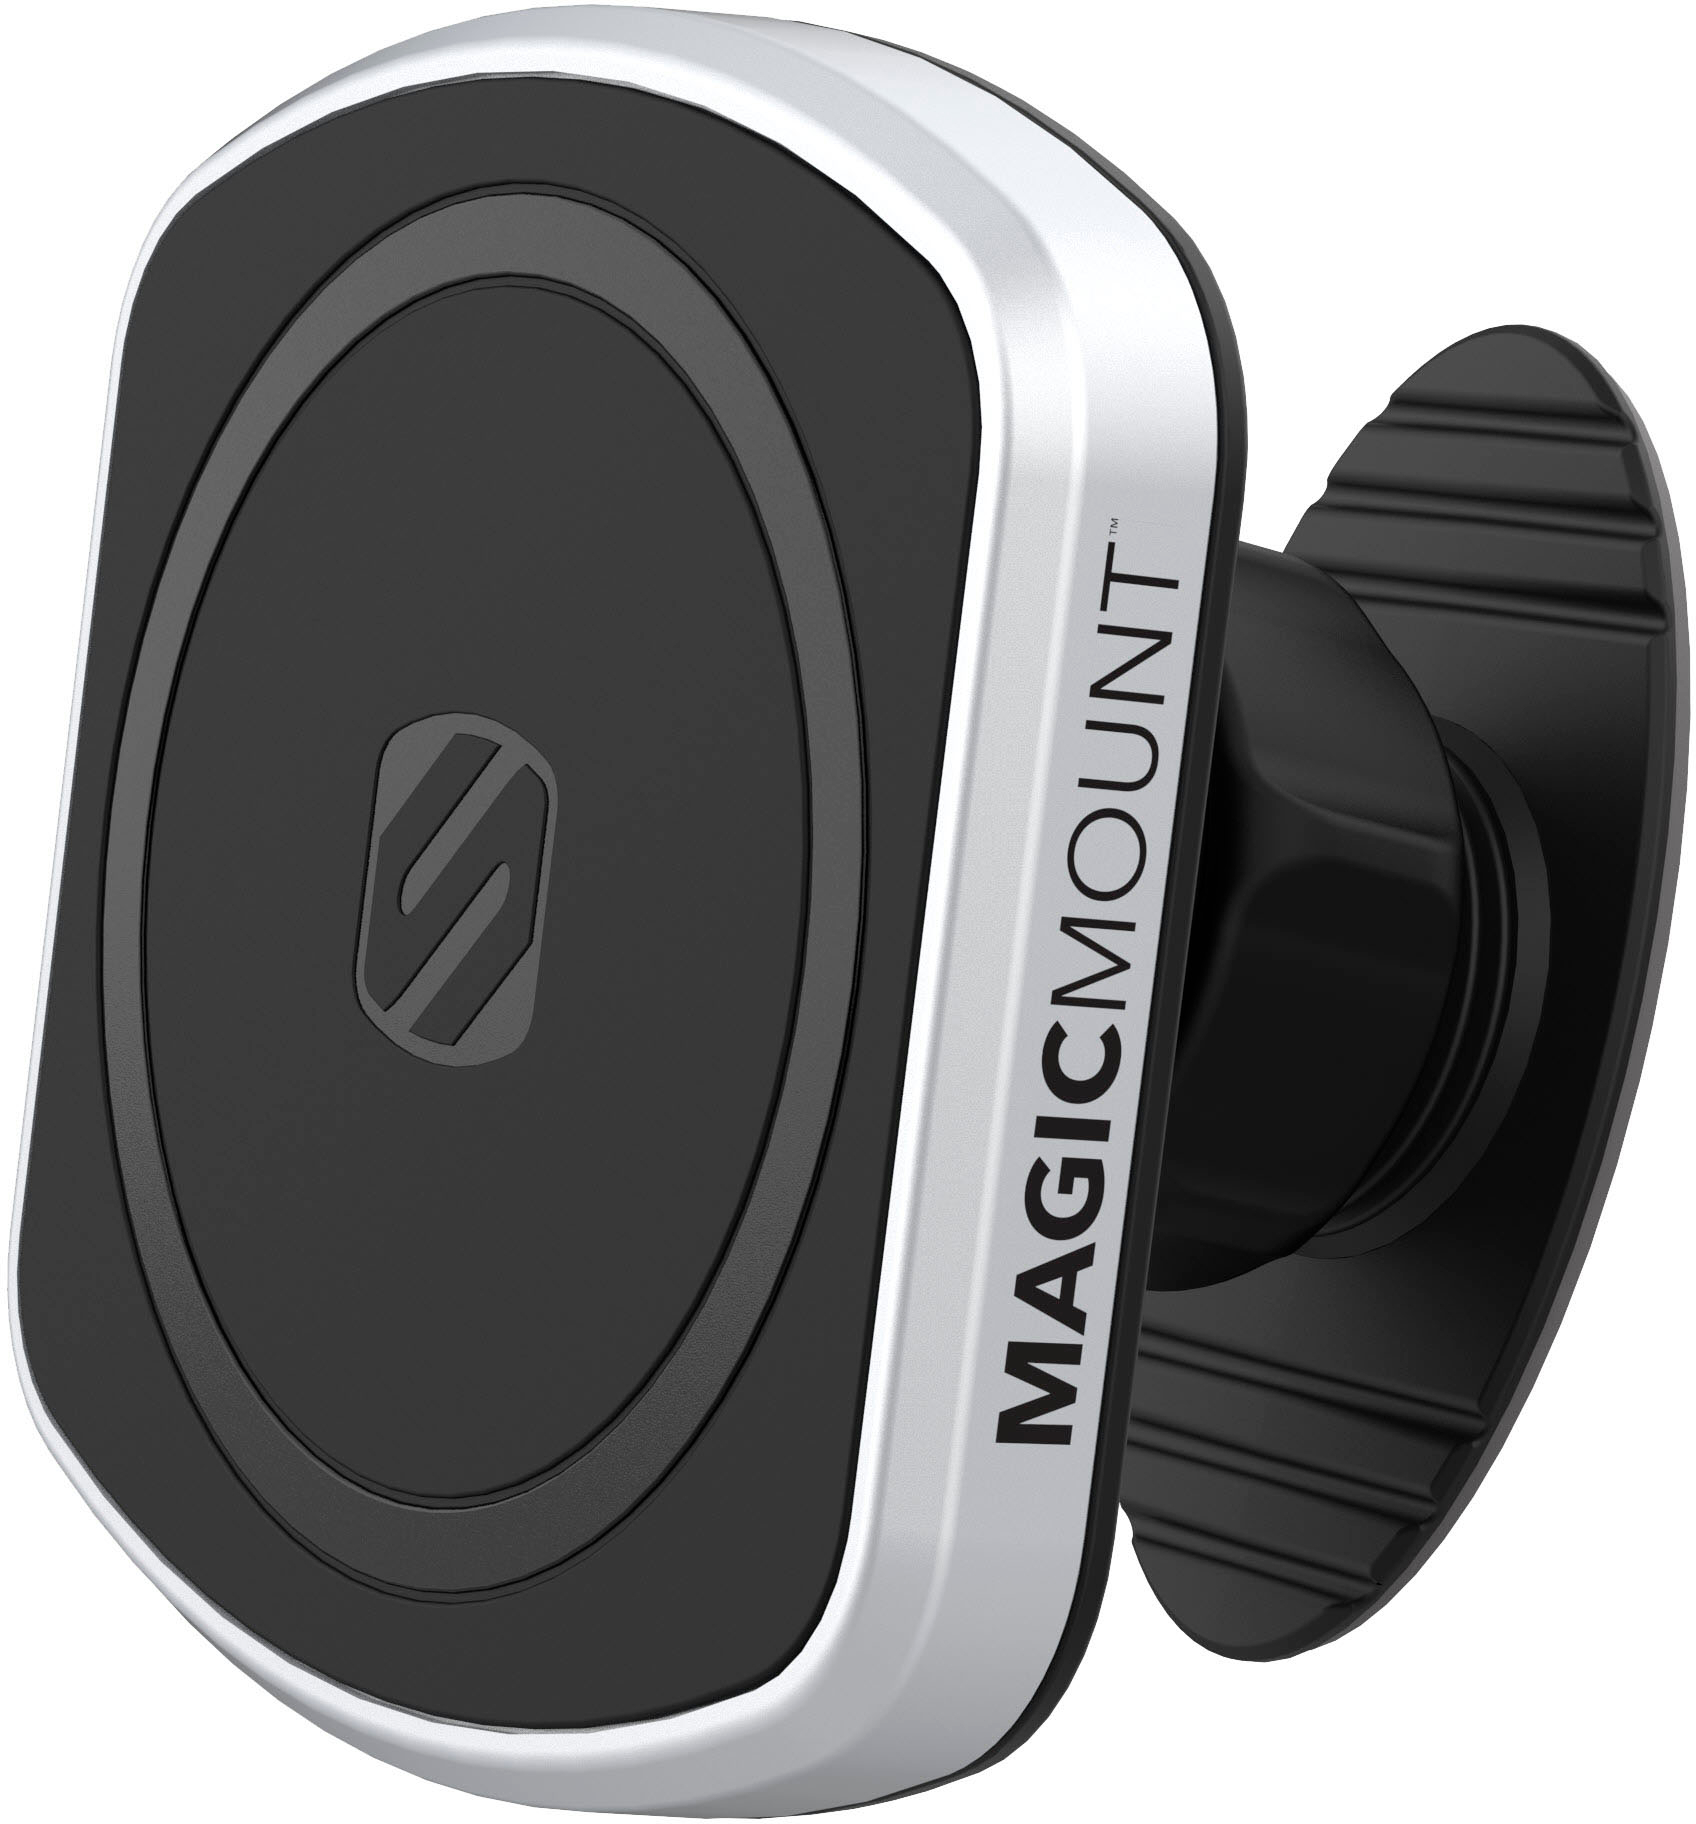 MagicMount™ MSC 4-in1 Magsafe Charger